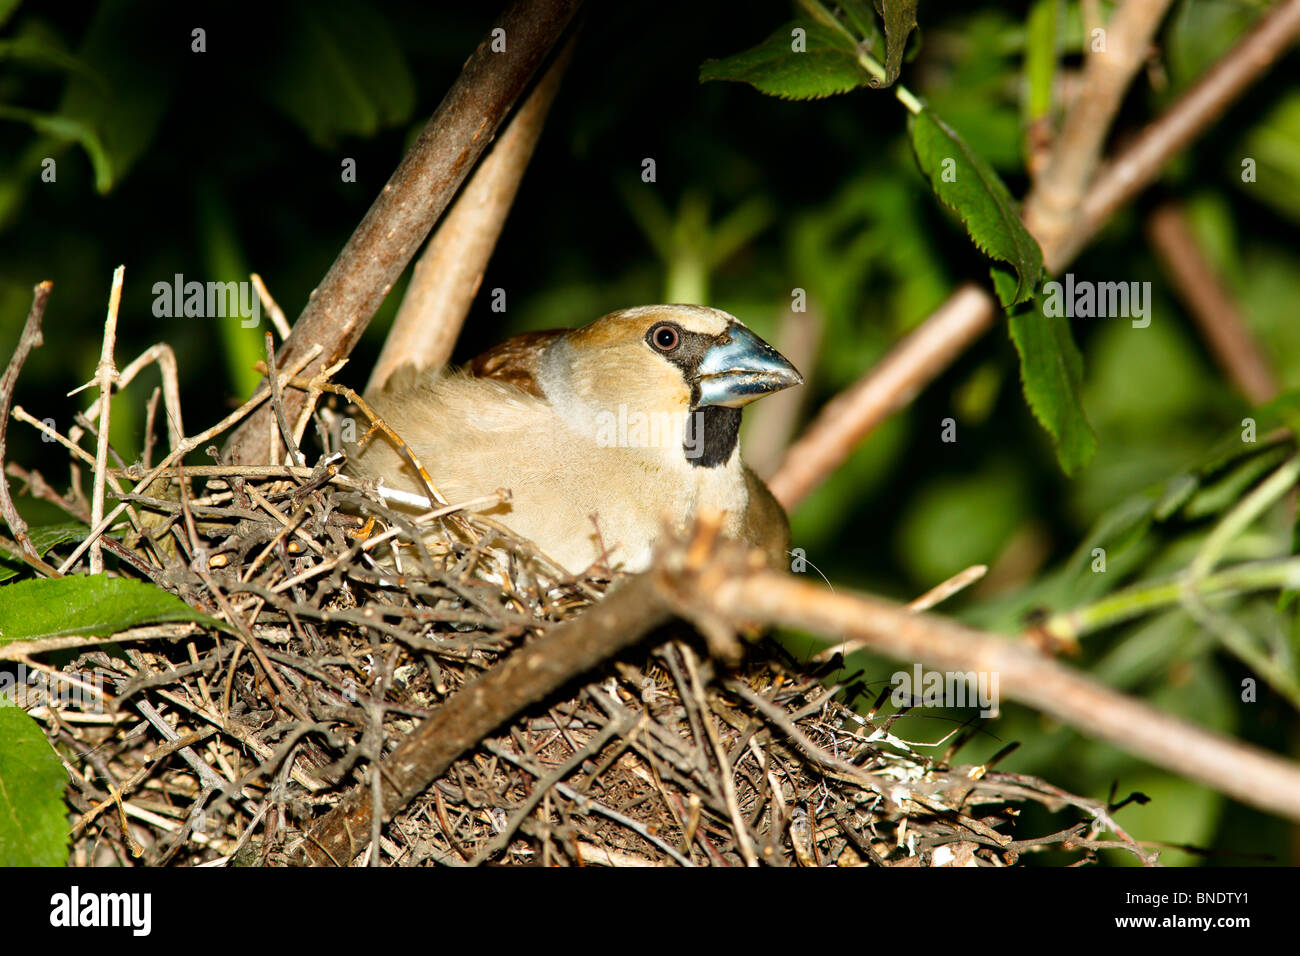 Nest of a Hawfinch (Coccothraustes coccothraustes) with baby birds in the nature. Stock Photo